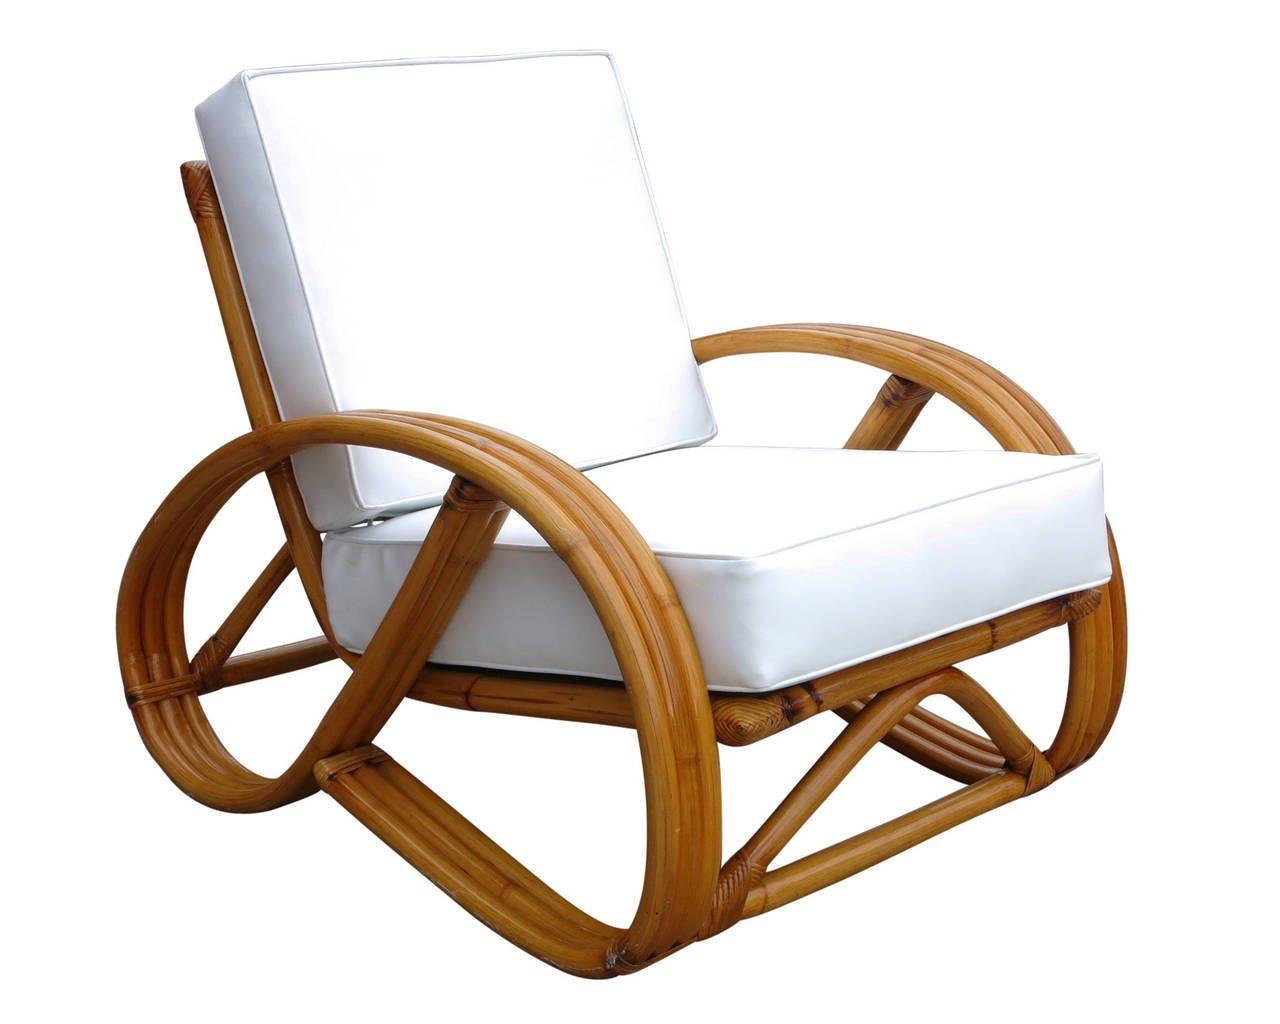 This round 3/4 pretzel arm rattan lounge chair has a unique decorative wave detail around the perimeter of the base. The accompanying bent rattan ottoman also features three strand U-shaped legs with matching wave detail. Professionally restored in